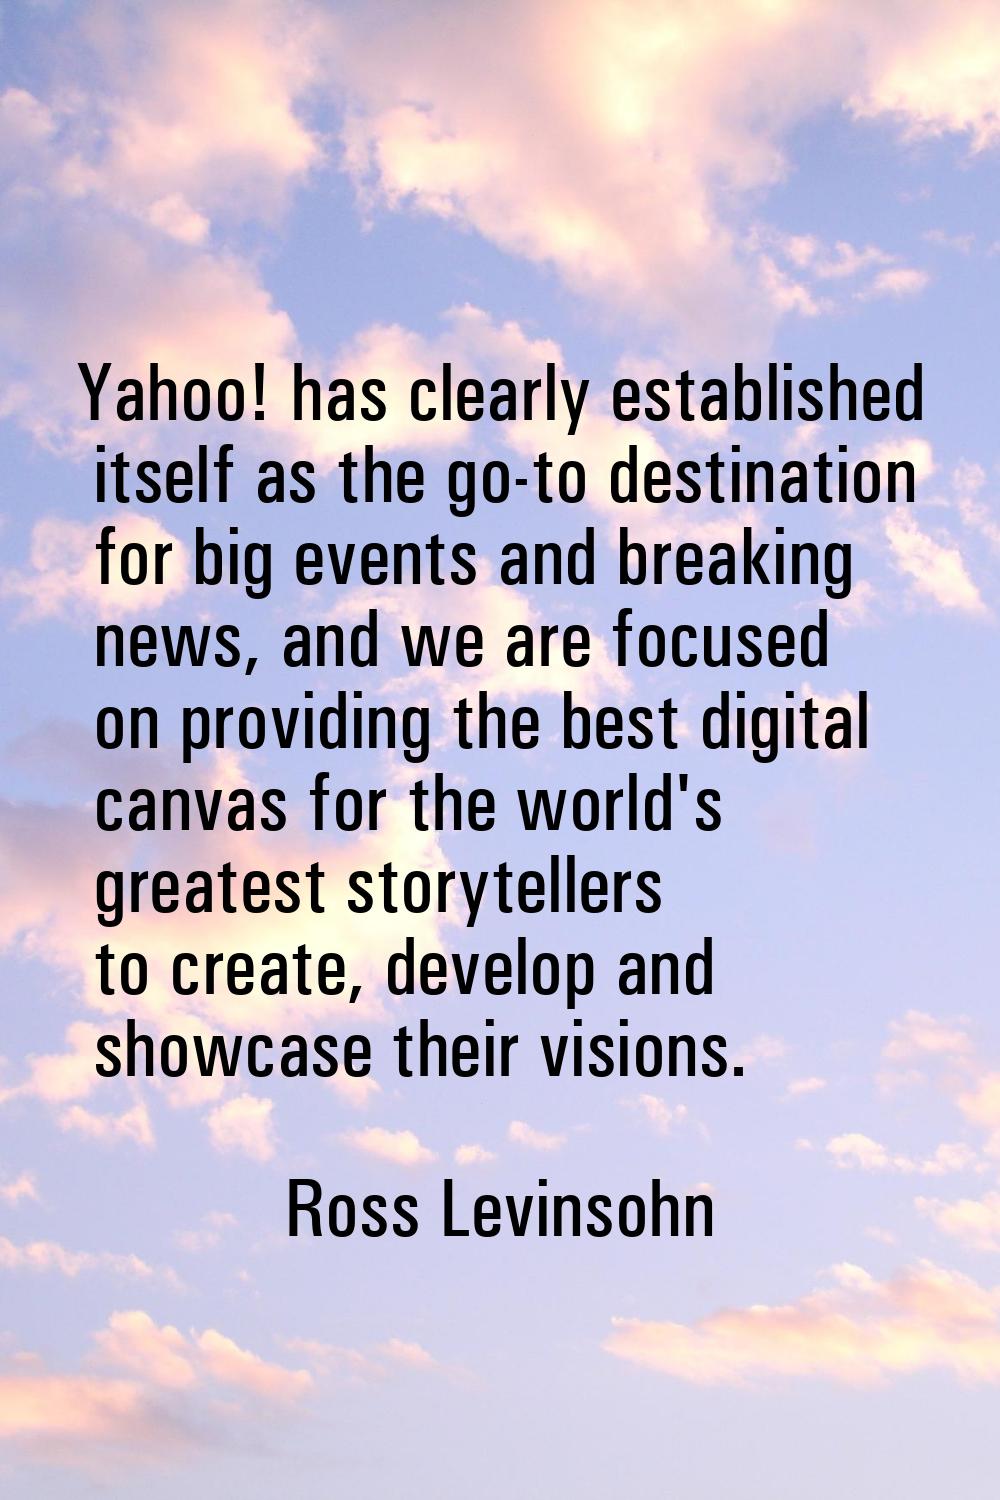 Yahoo! has clearly established itself as the go-to destination for big events and breaking news, an